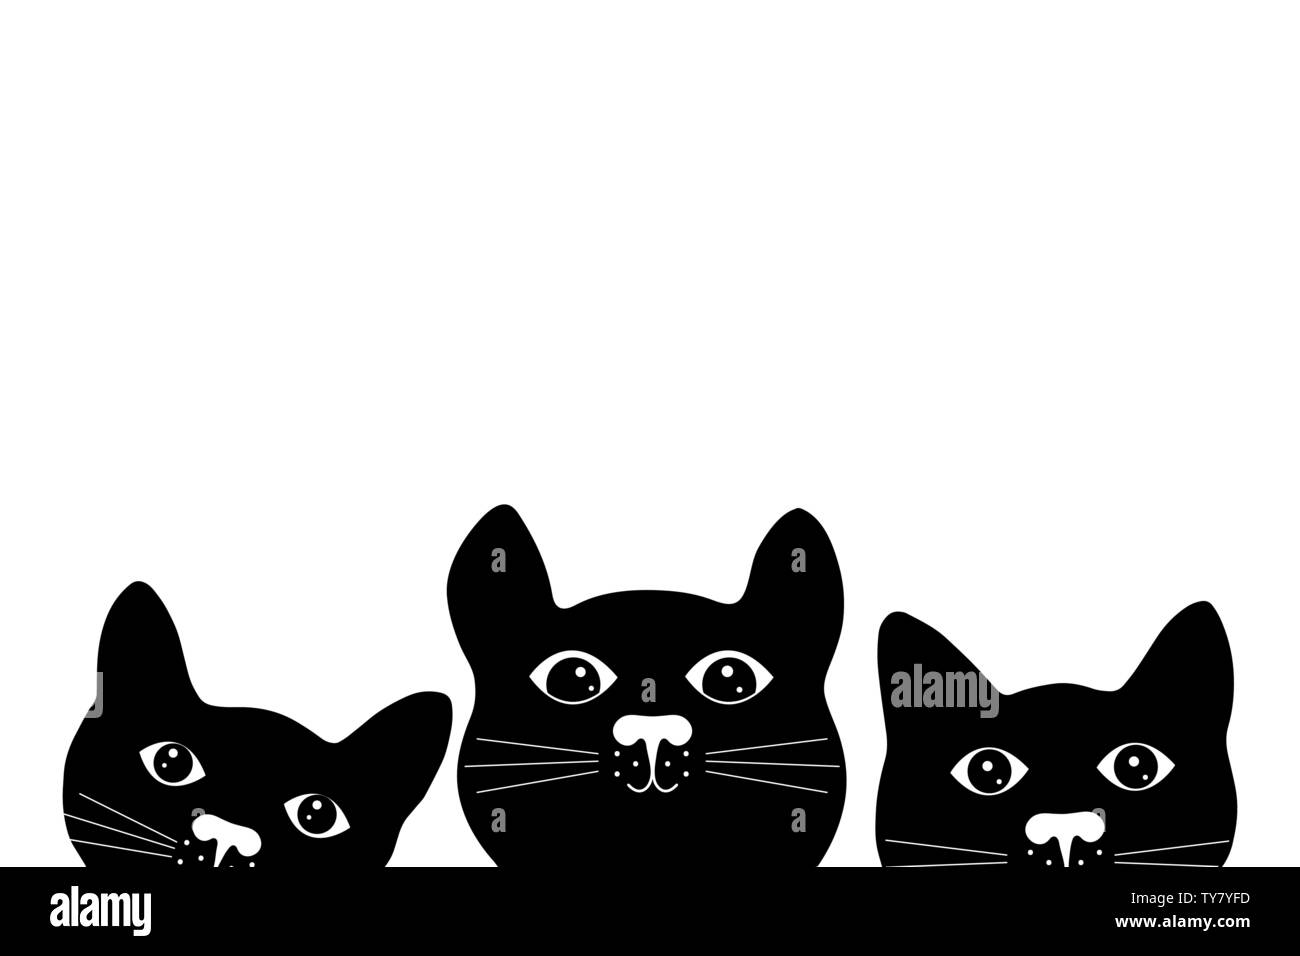 Three cute black cat faces. Silhouette of cats on white background. Stock Vector